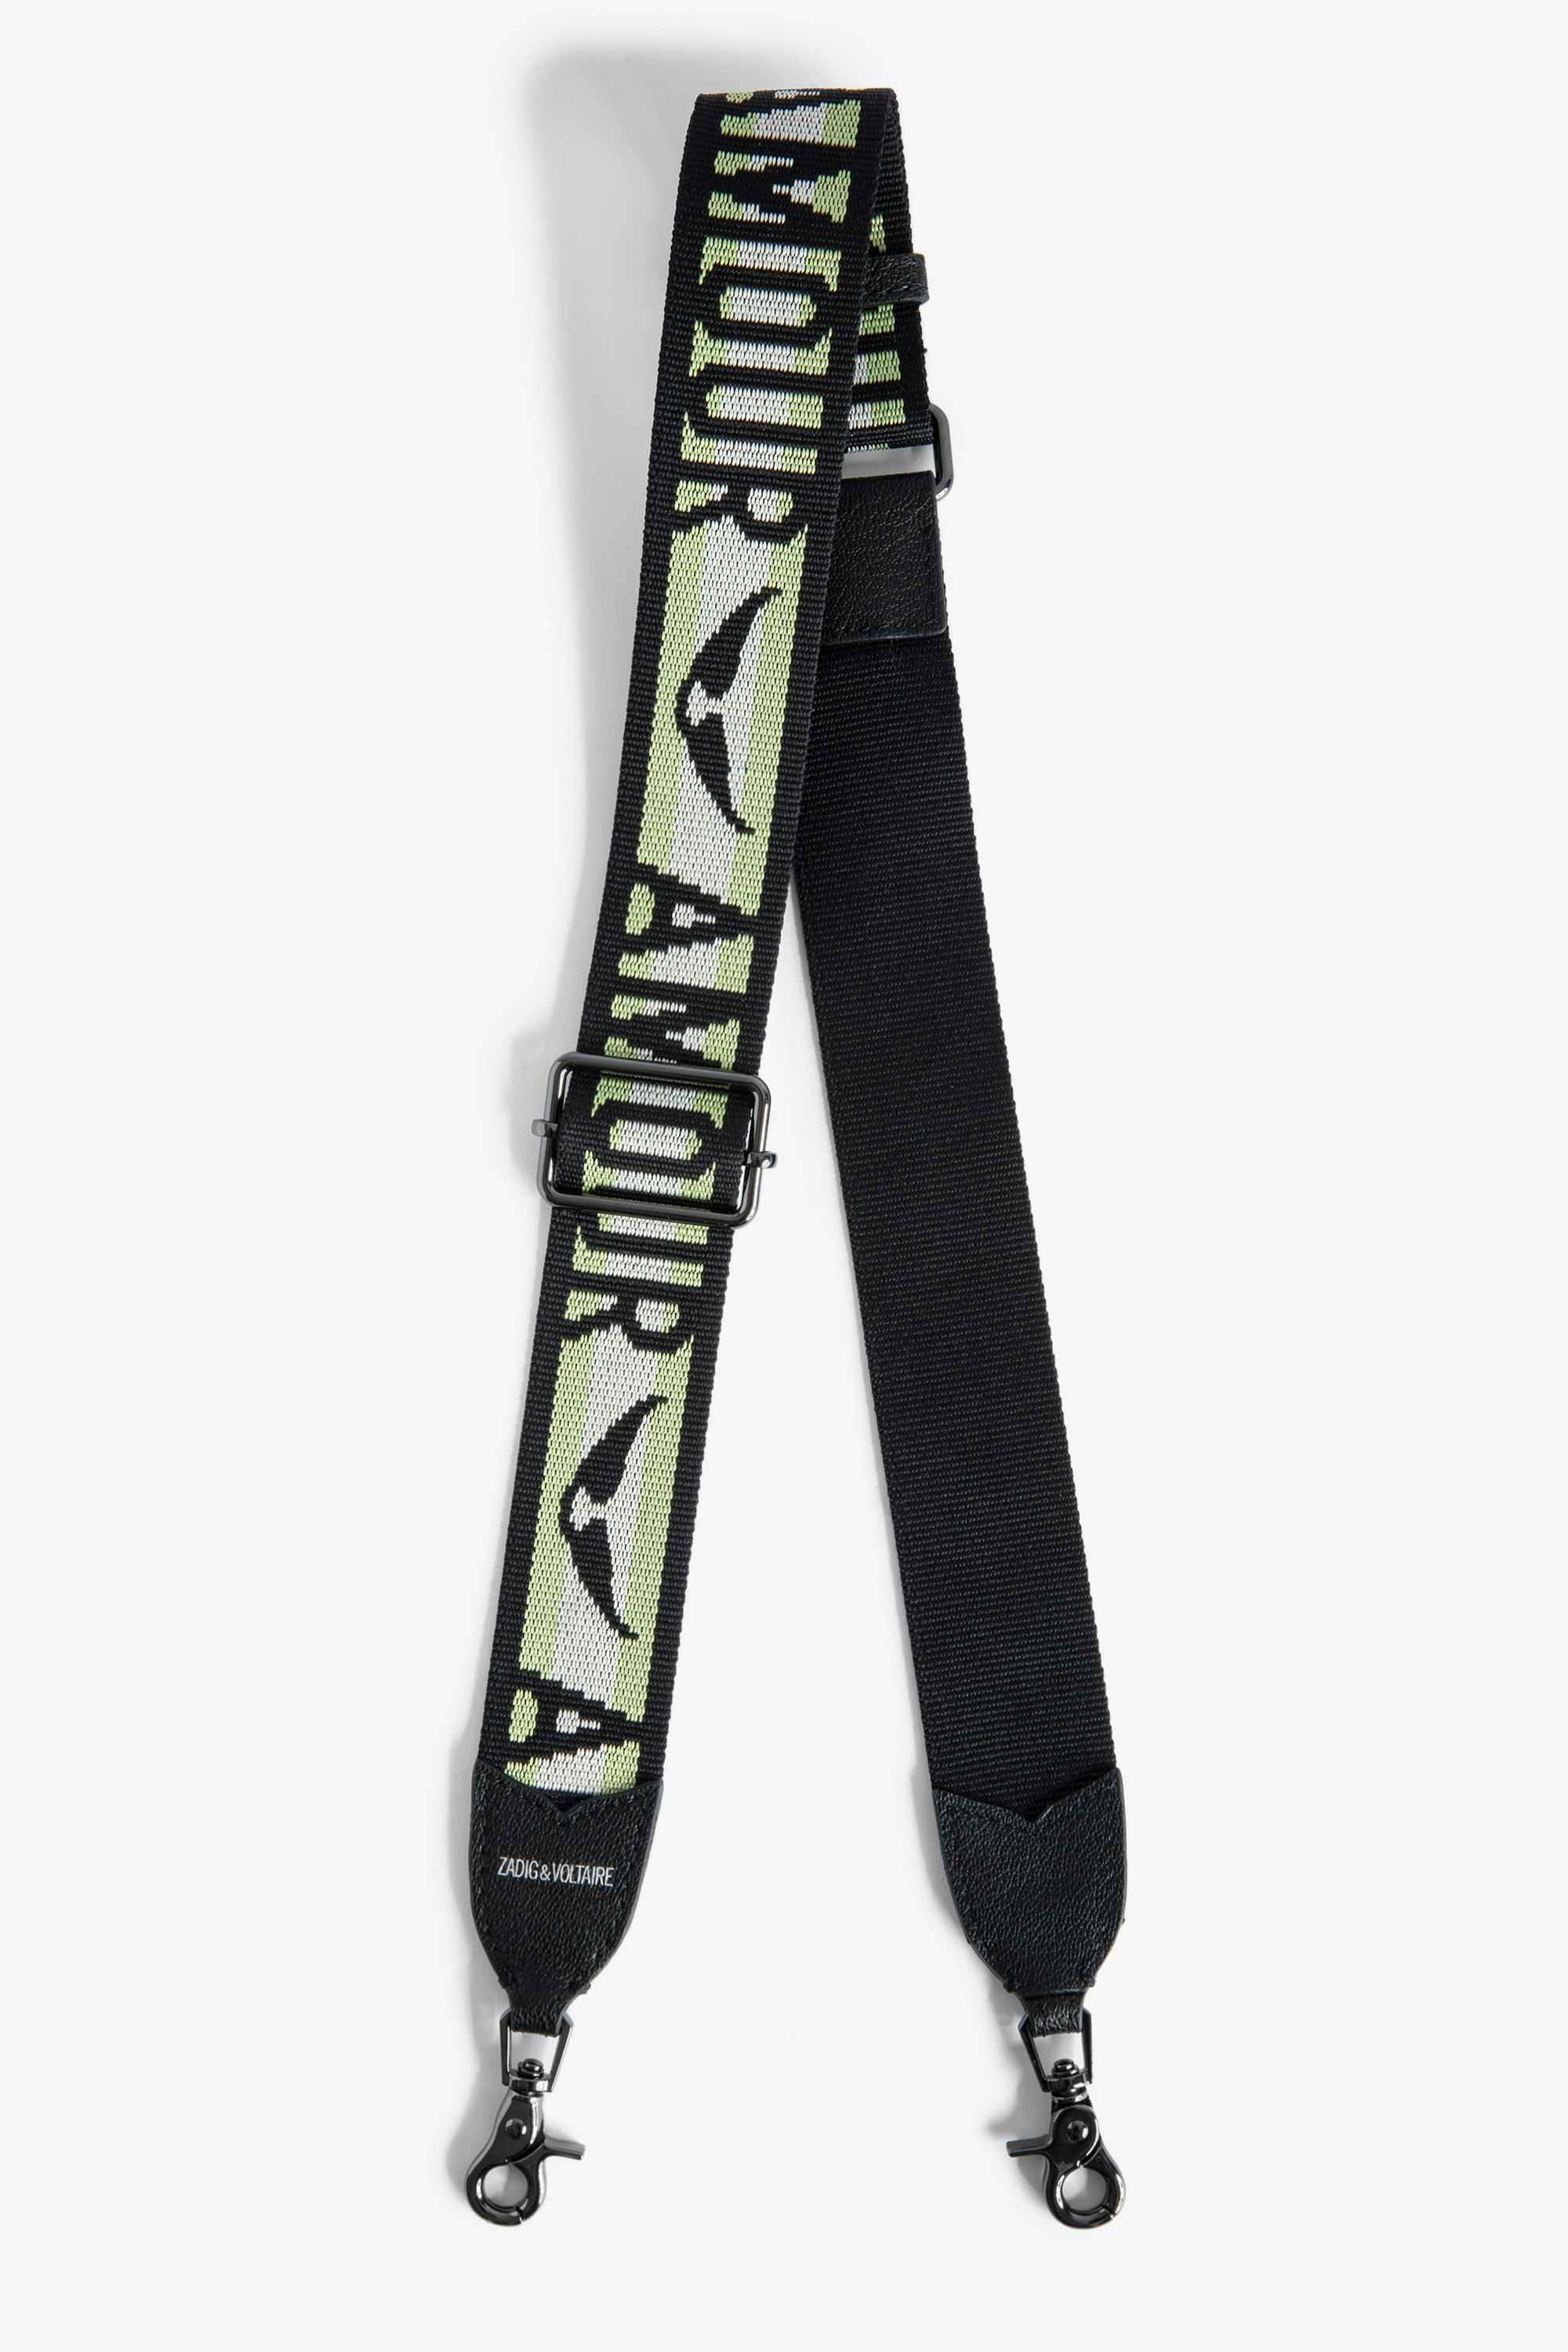 Zadig Shoulder Strap Women’s green leather and nylon shoulder strap with “Amour” slogan and wings motif.